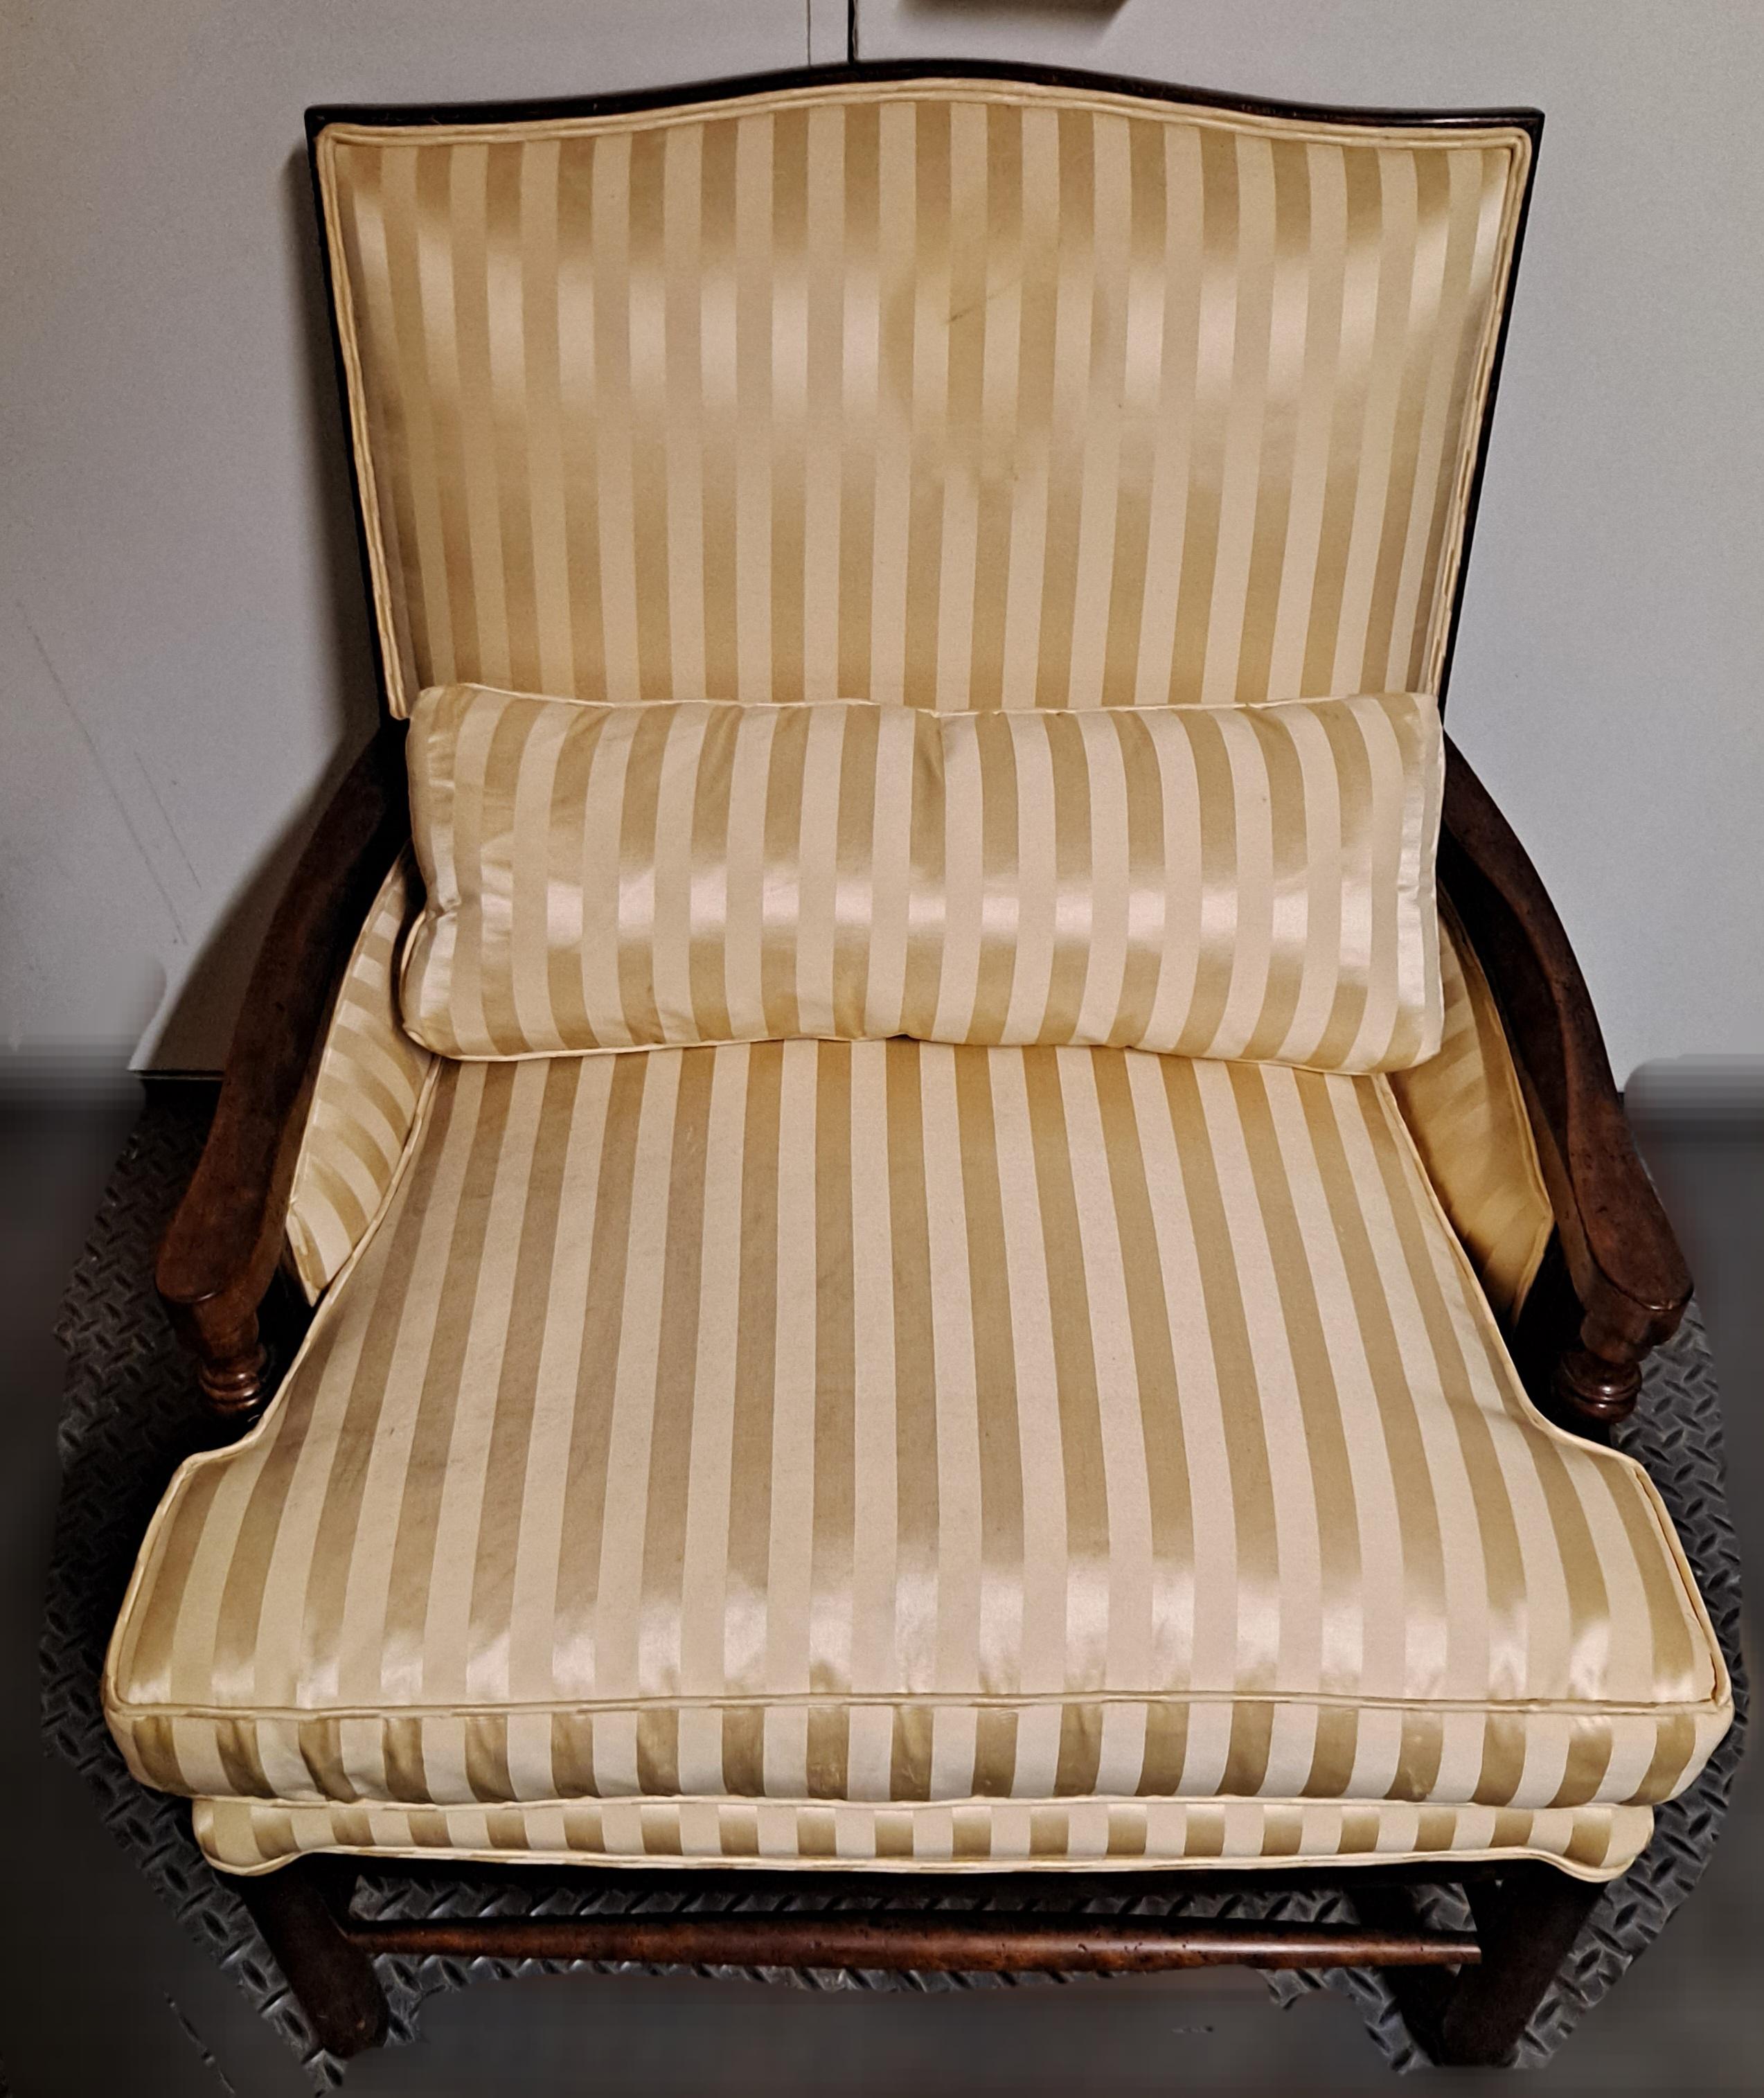 Minton-Spidell Silk Upholstered Armchair

30